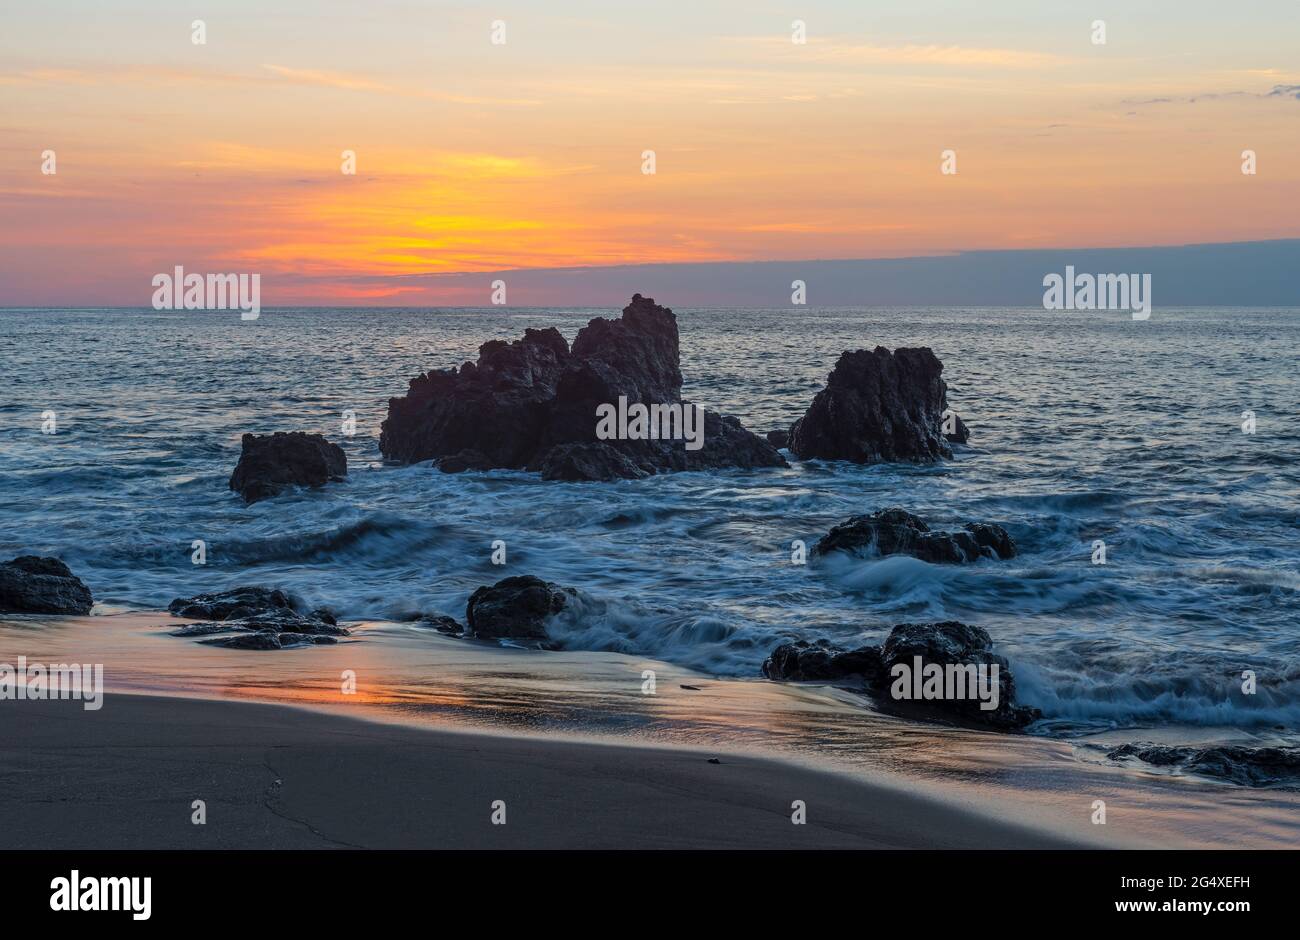 Corcovado national park beach at sunset with rocks by Pacific Ocean, Osa Peninsula, Costa Rica. Stock Photo